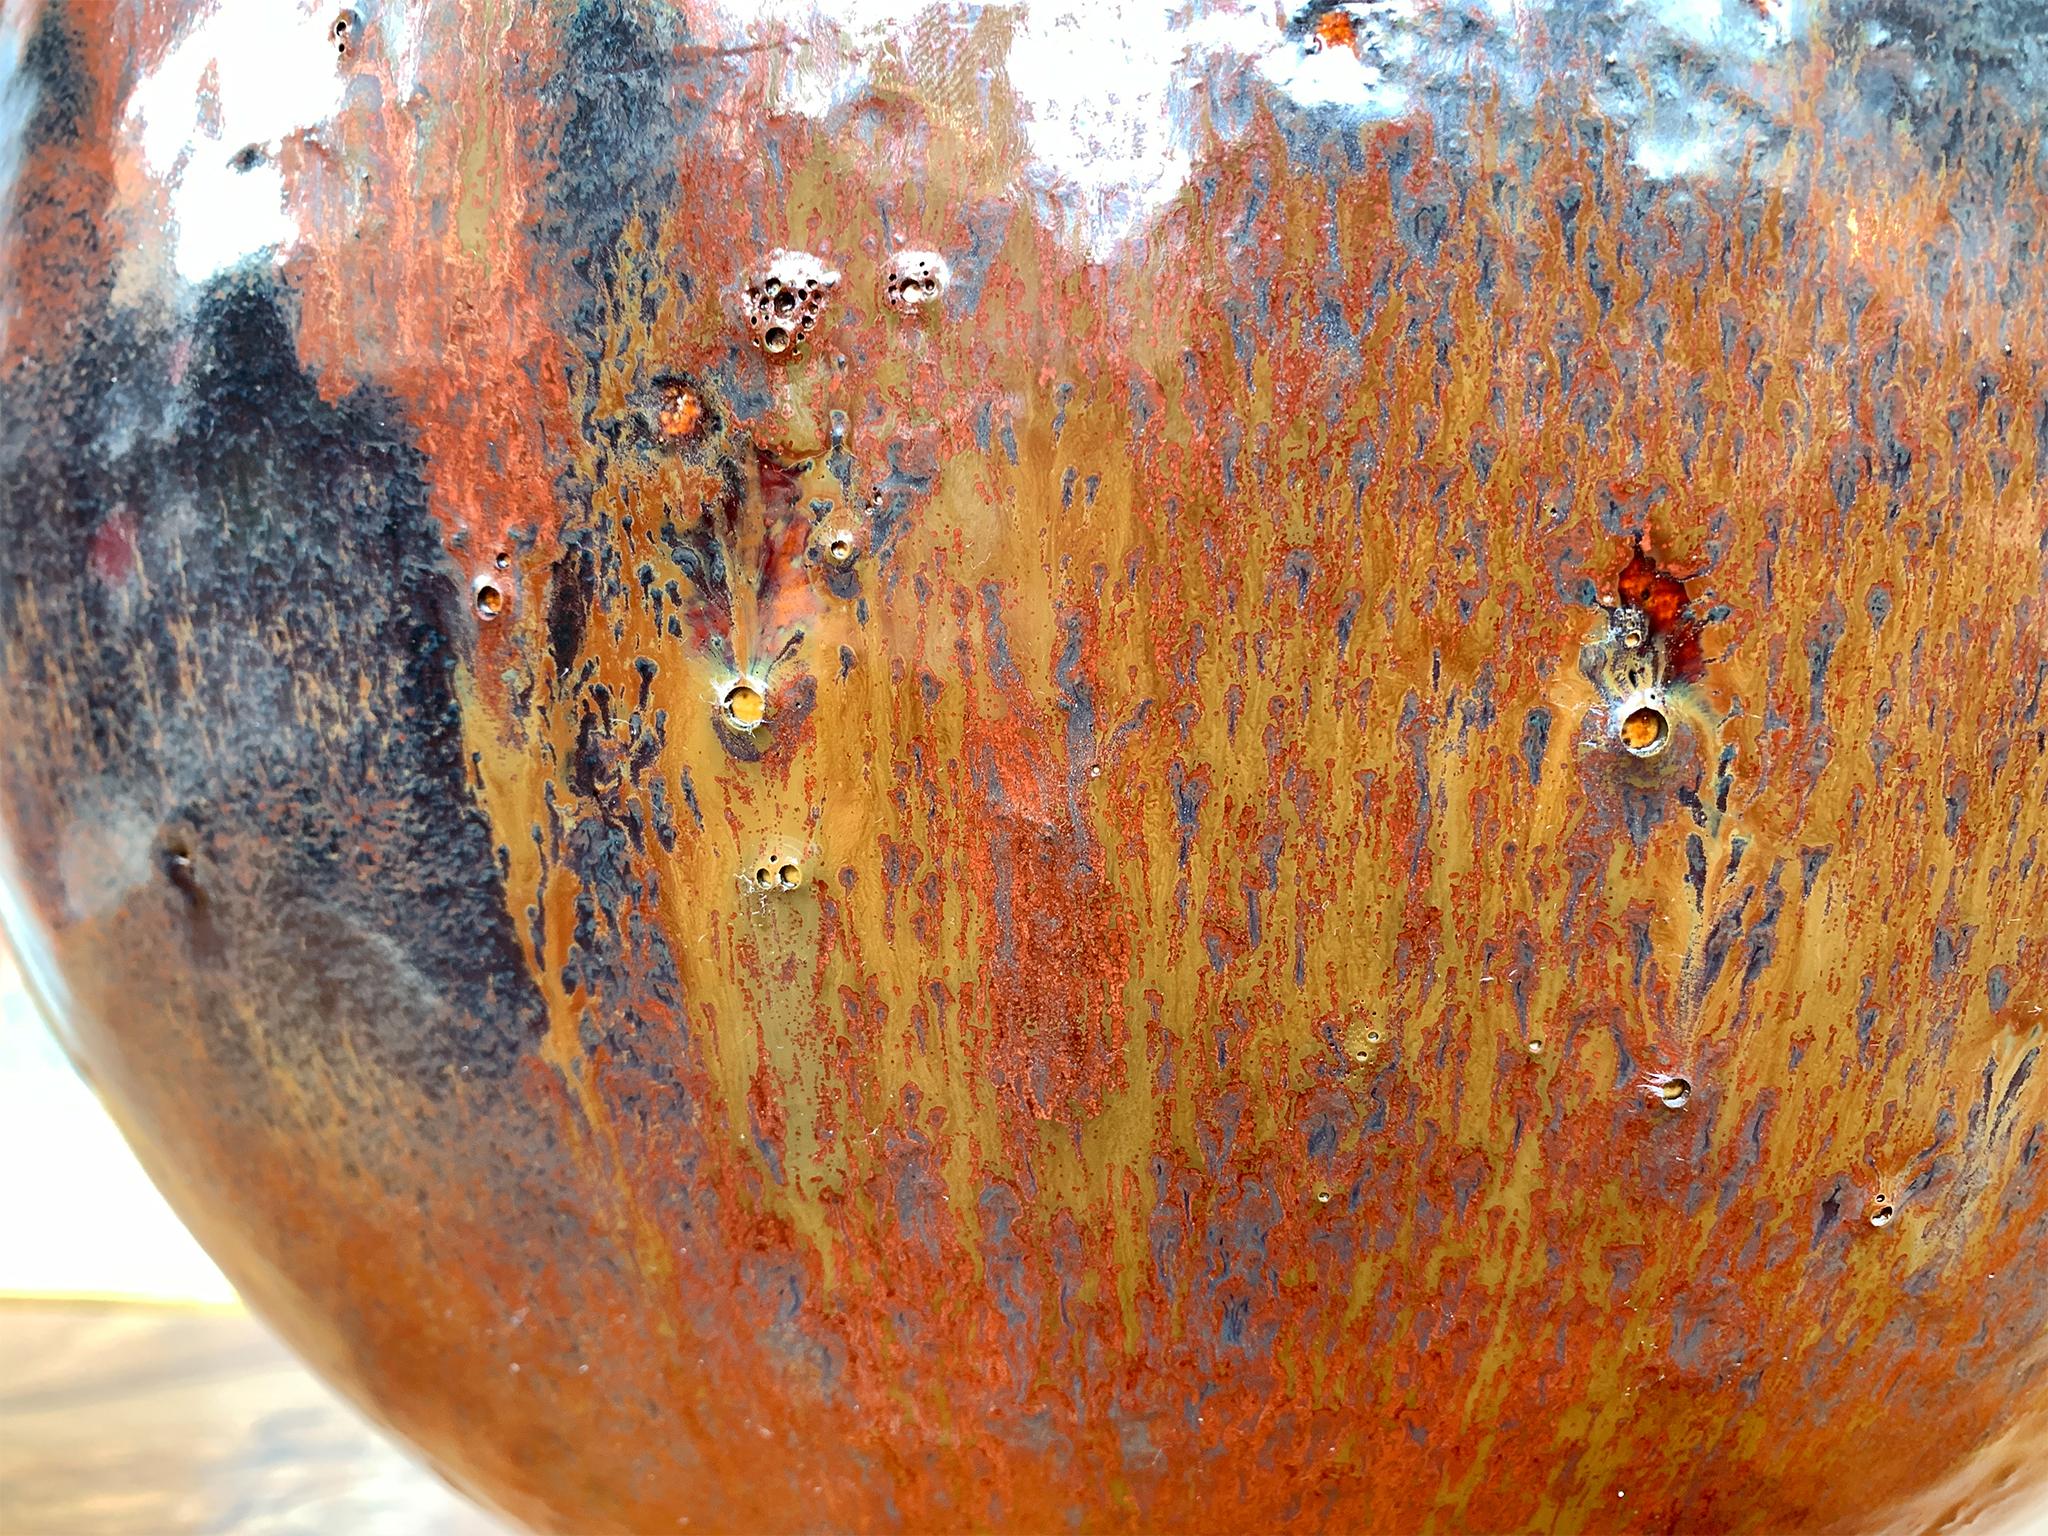 Contemporary Thom Lussier Ceramic Vessel #1 - From the Golden Patina Collection